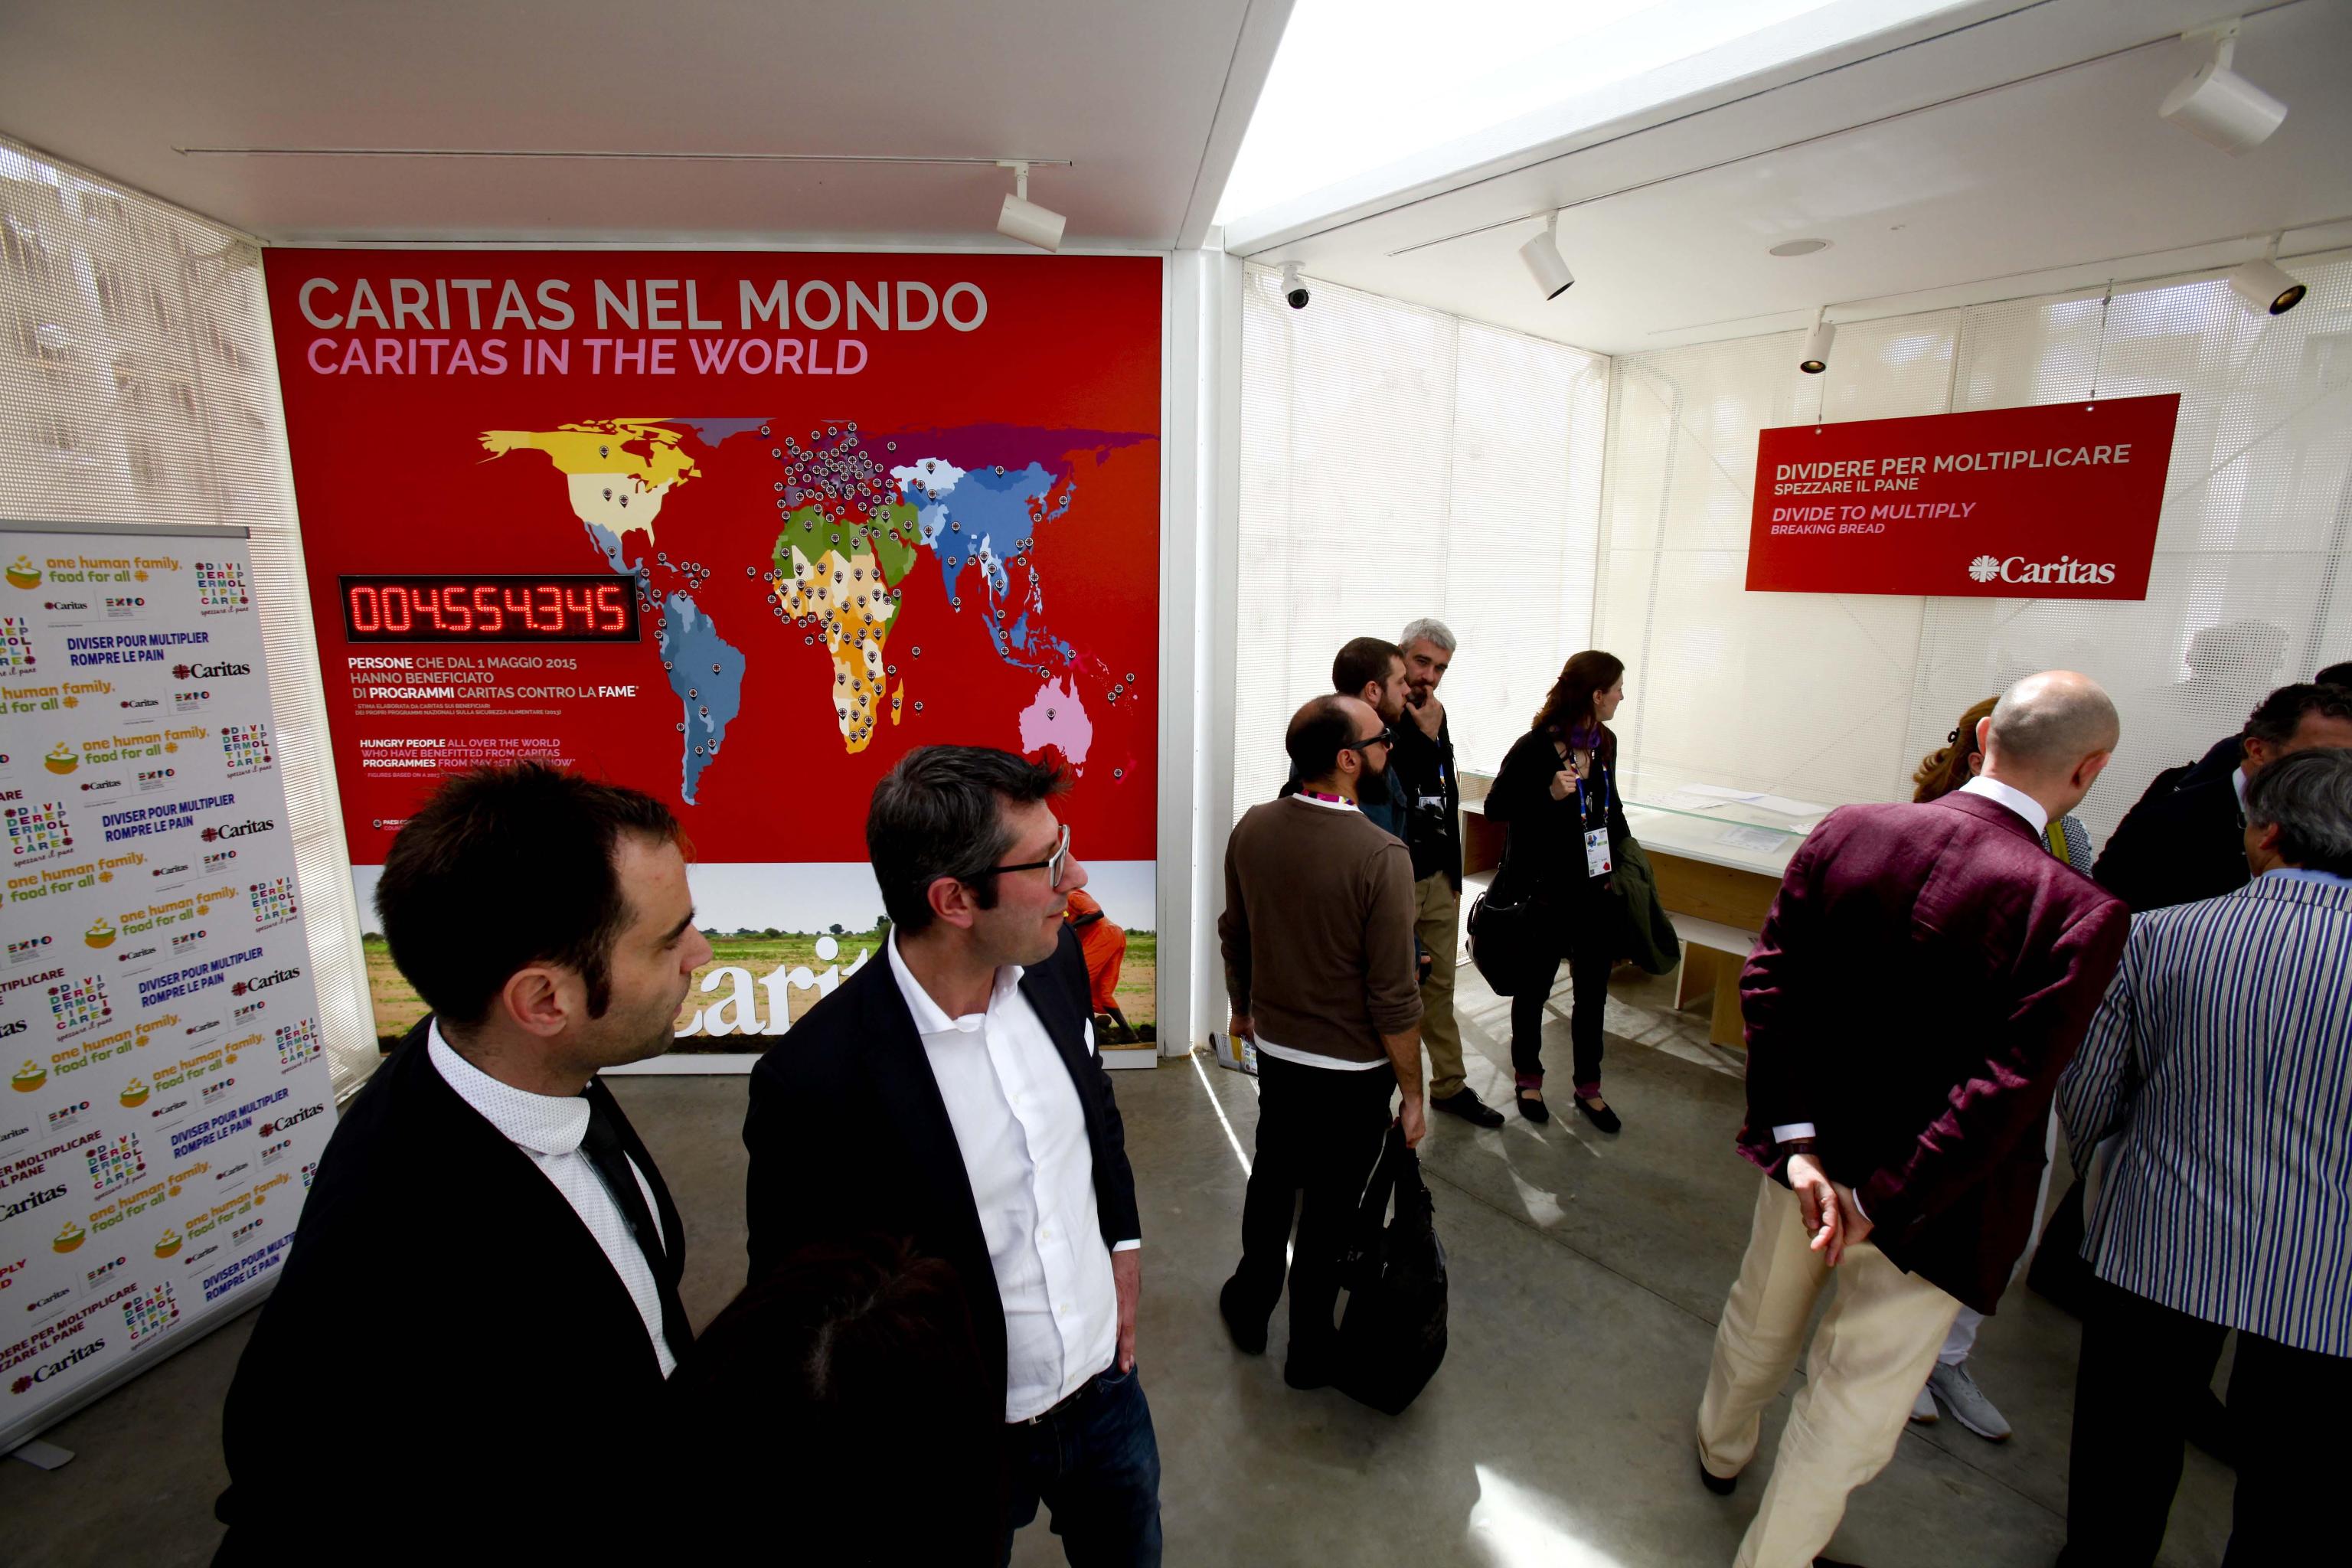 Opening of the Caritas Pavilion at Expo Milano 2015